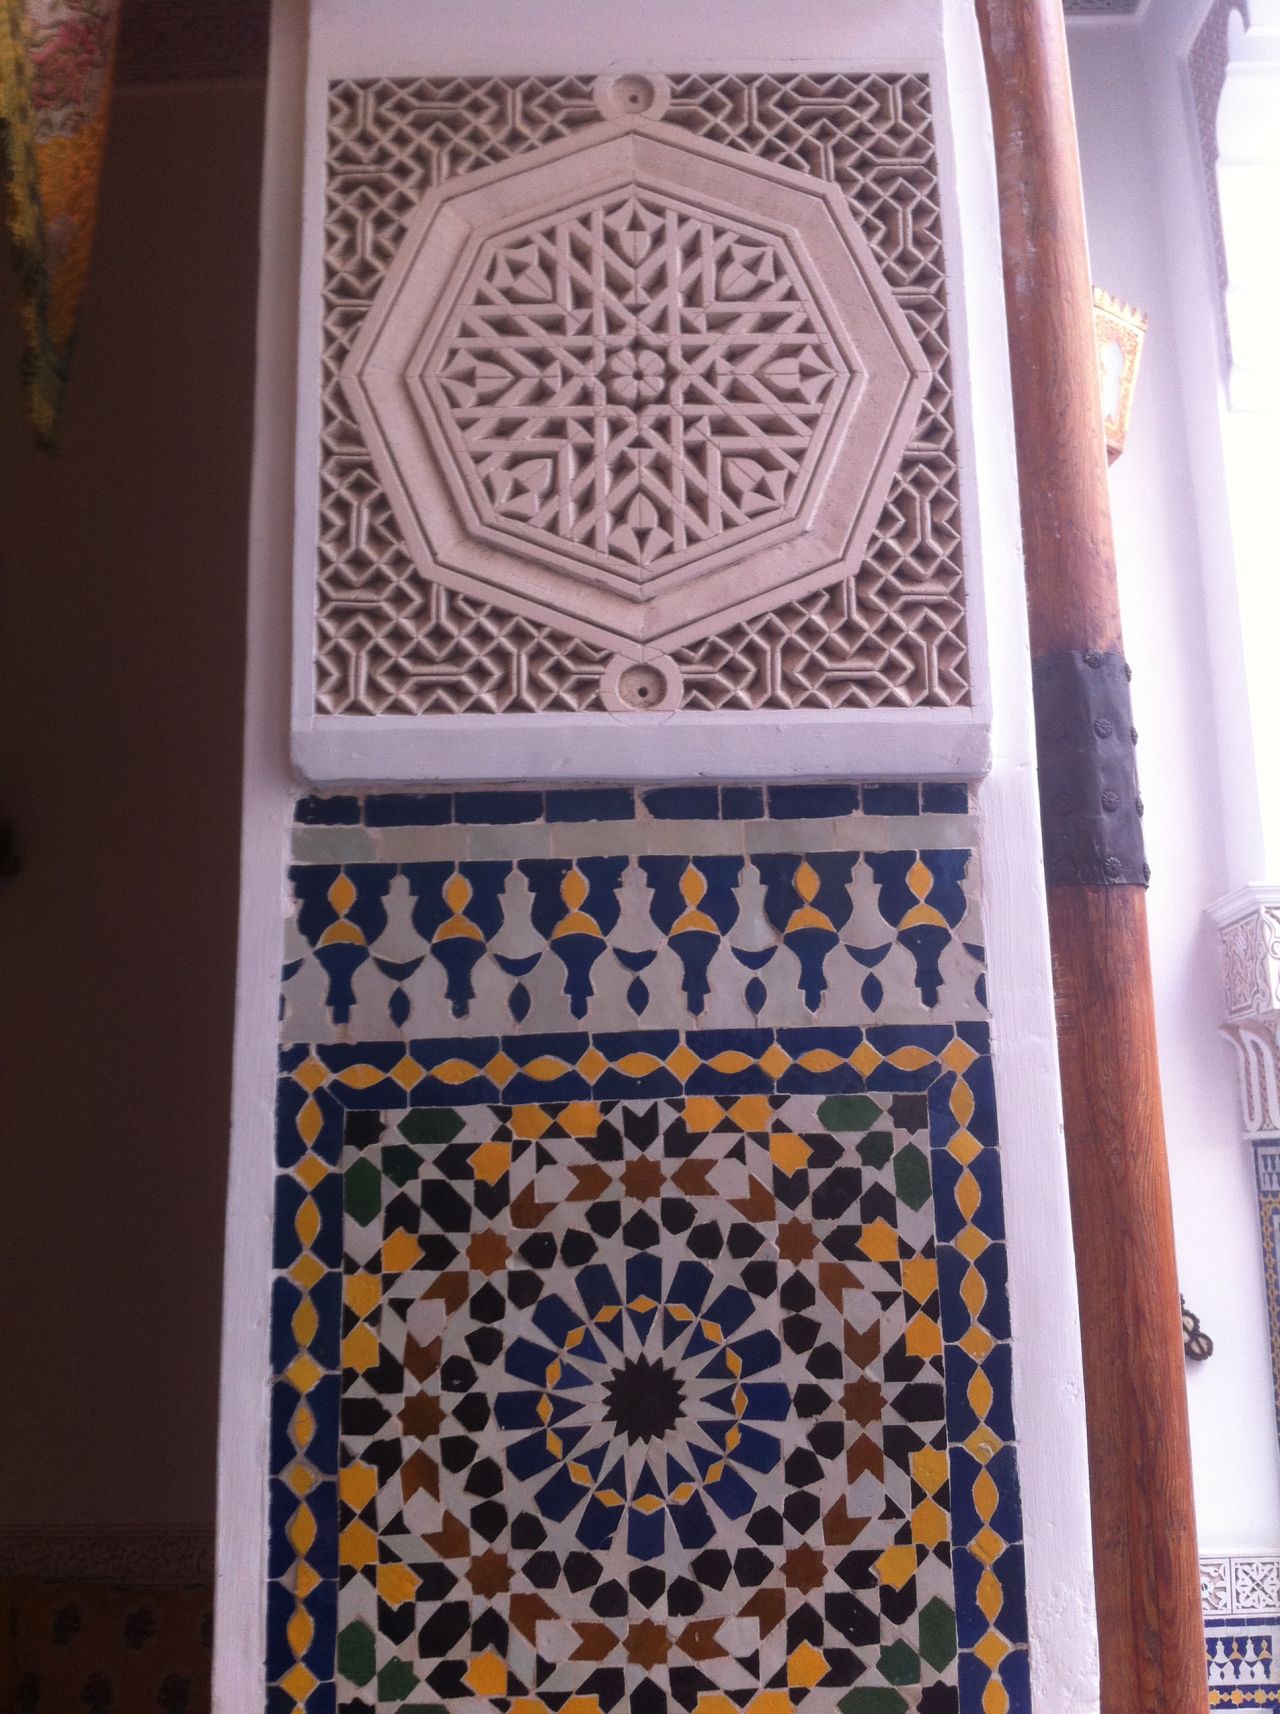 <strong>Riad El Amine (Fez): </strong>Riad El Amine in Fez features ornamentation from traditional Moroccan crafts such as zellij (glazed ceramic tiles) in colorful geometric patterns on walls and floors.